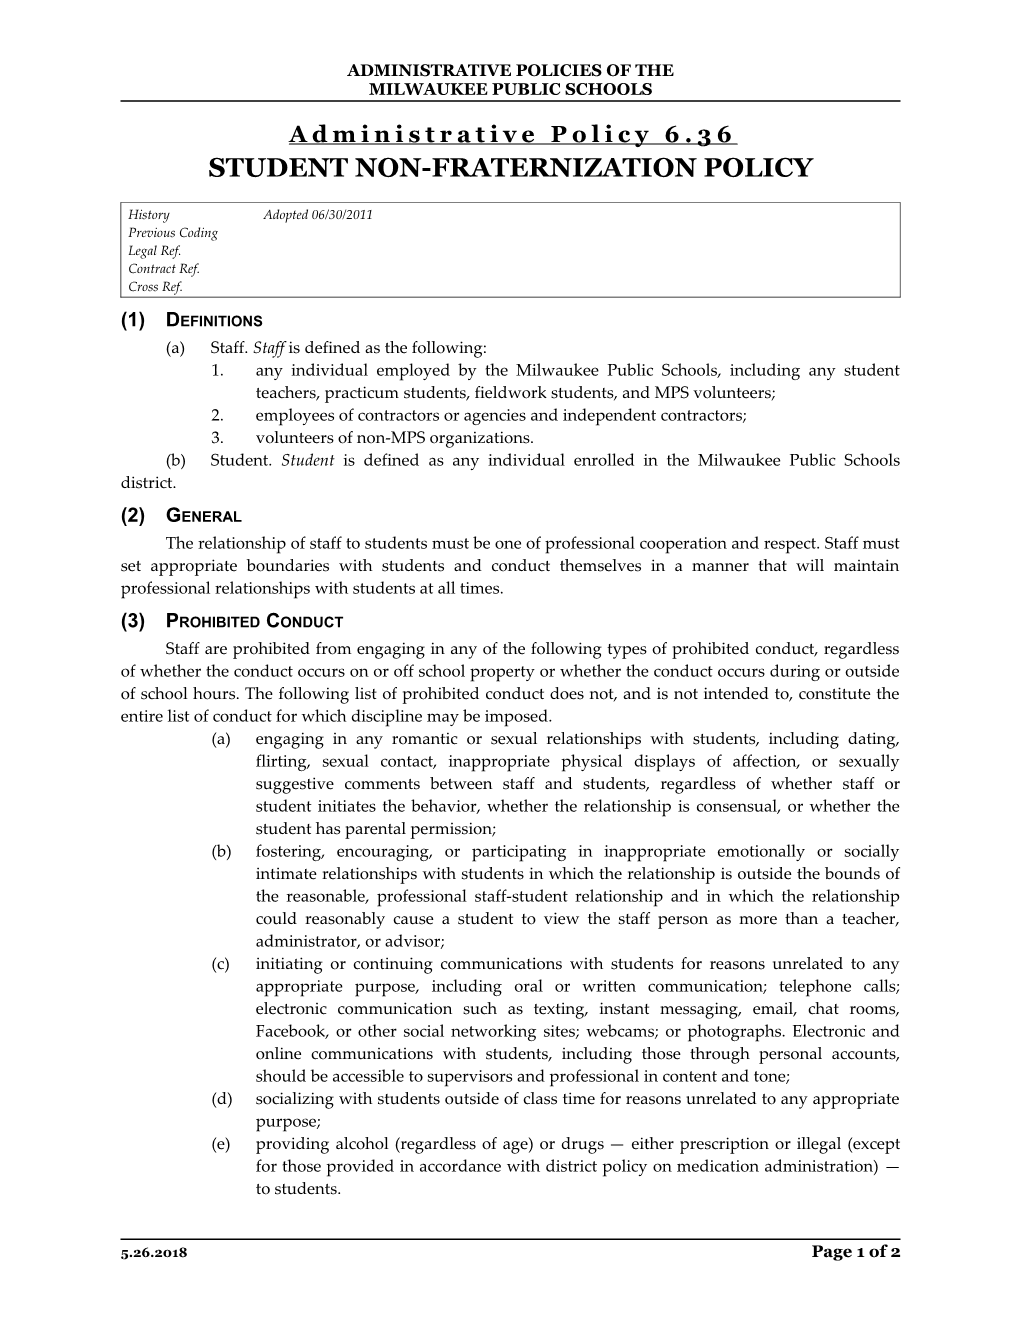 Administrative Policy 6.36: STUDENT NON-FRATERNIZATION POLICY